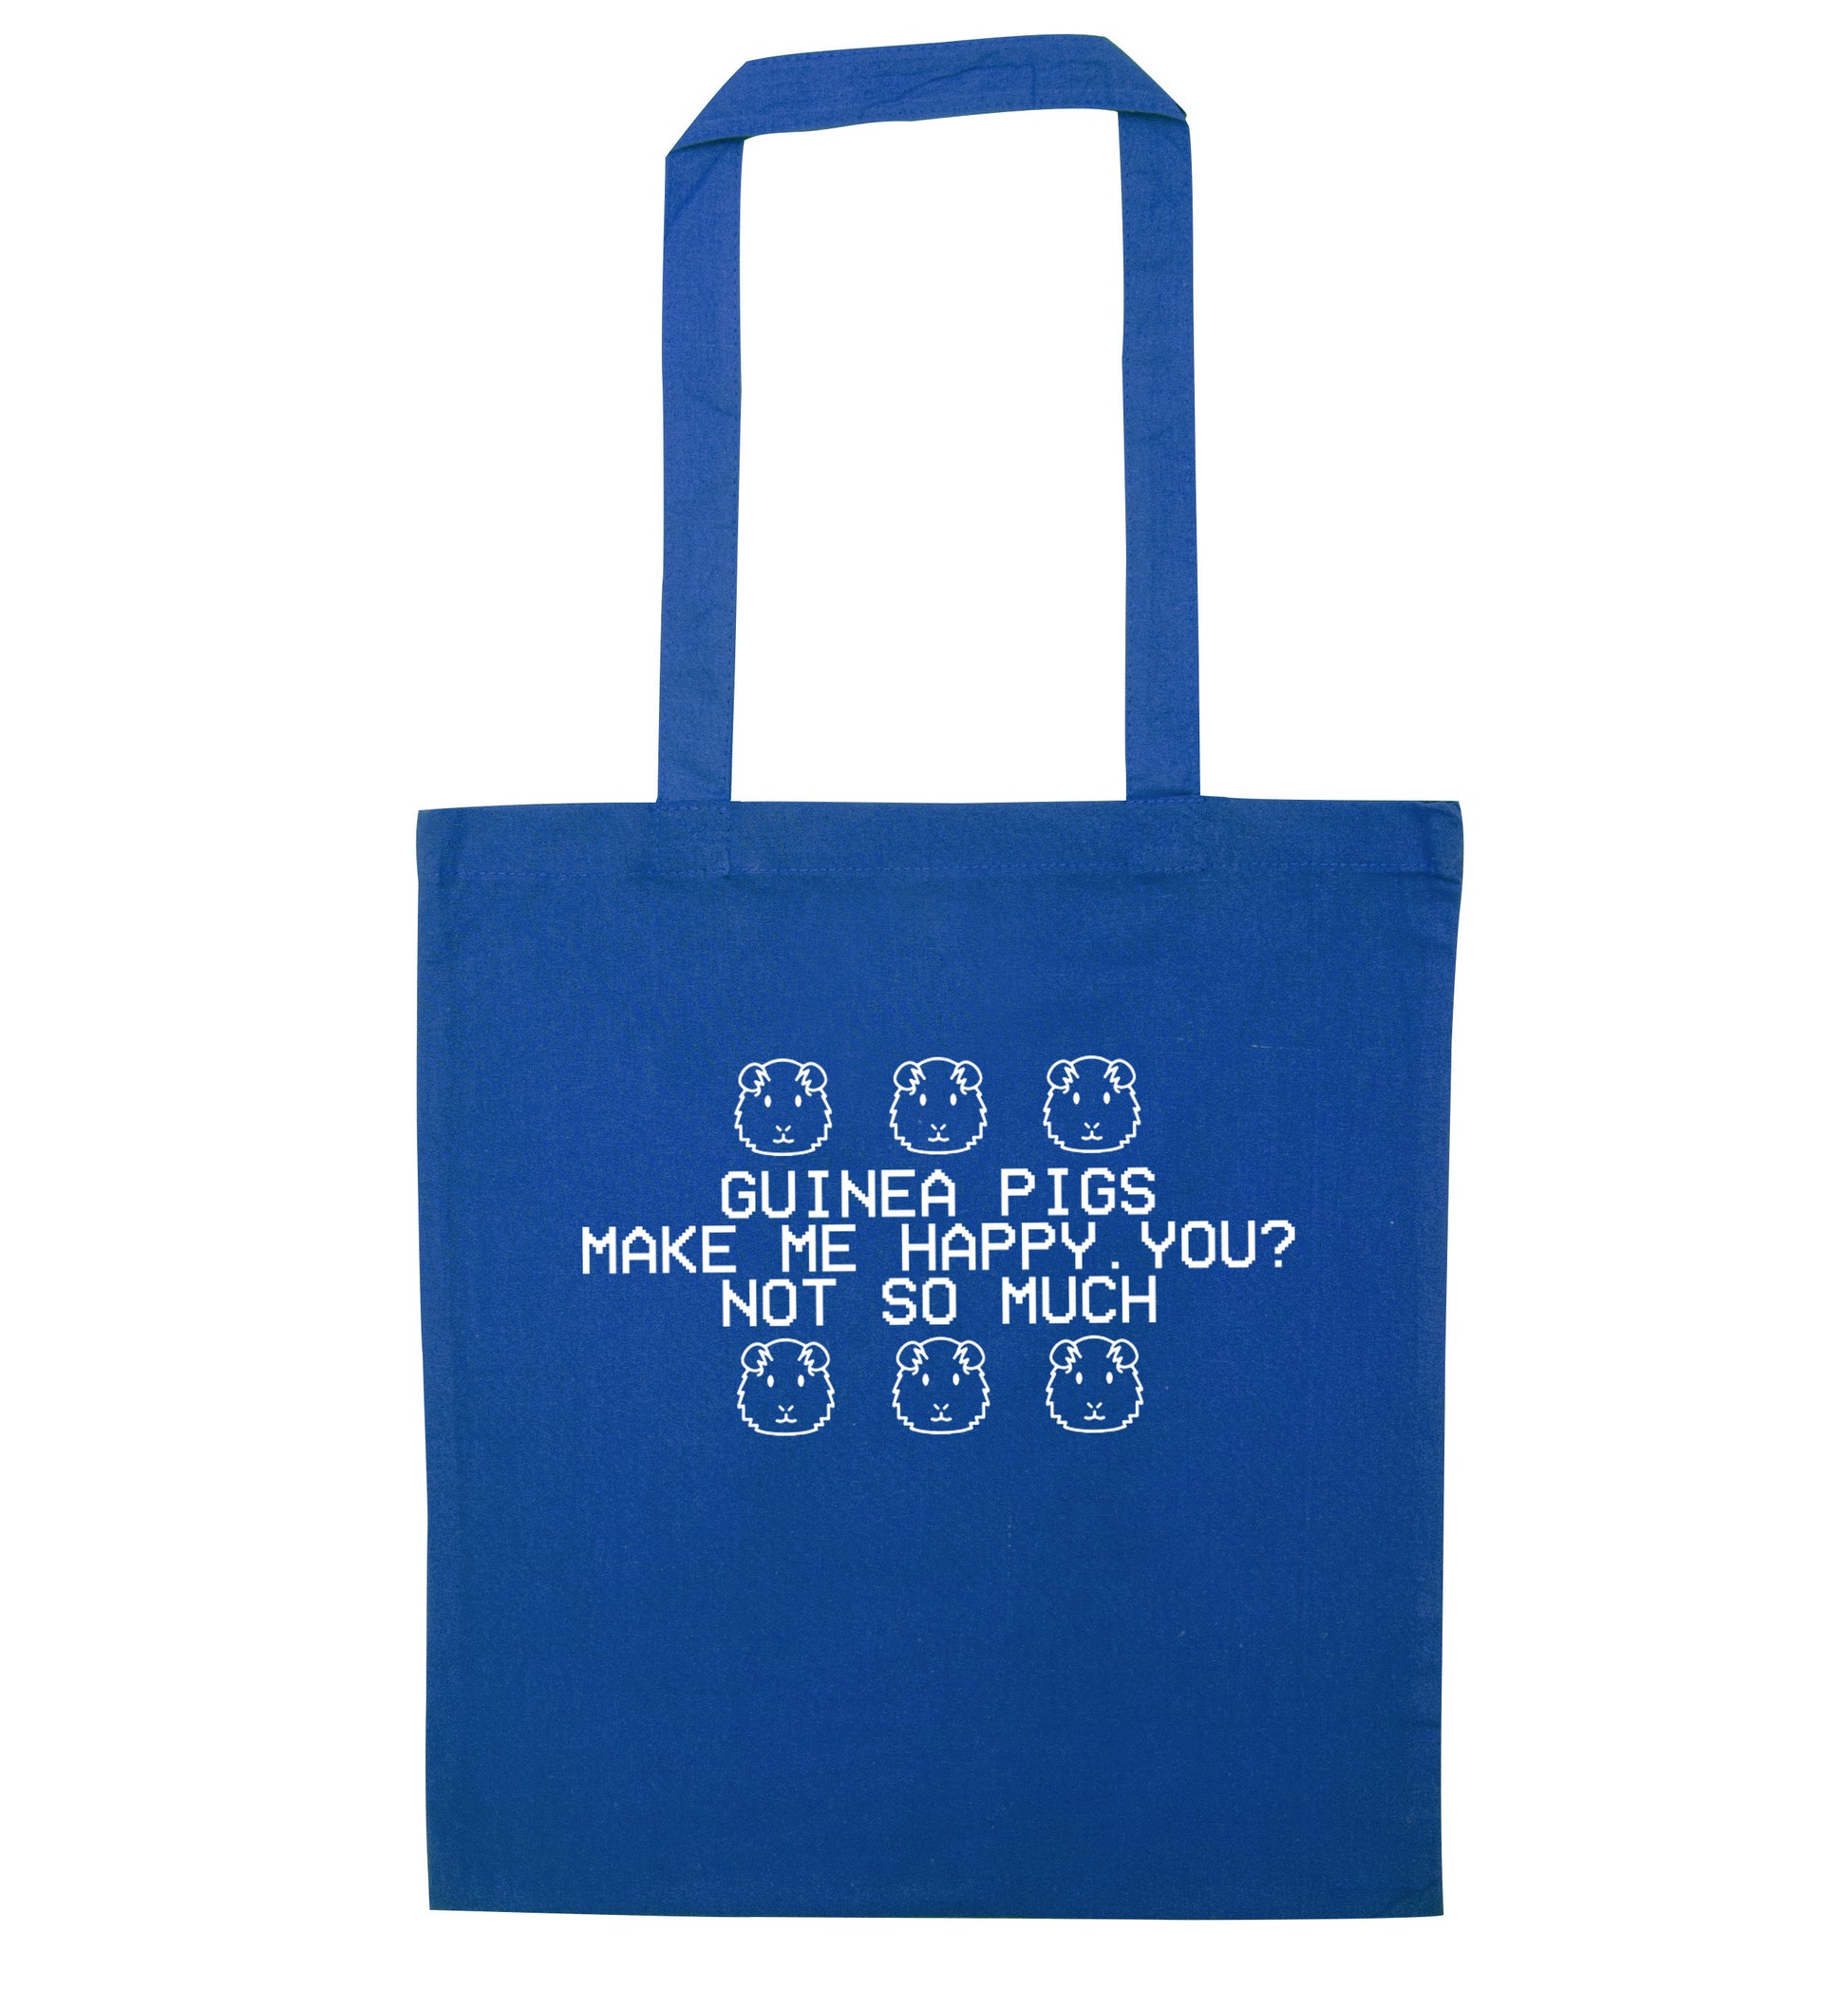 Guinea pigs make me happy, you not so much blue tote bag